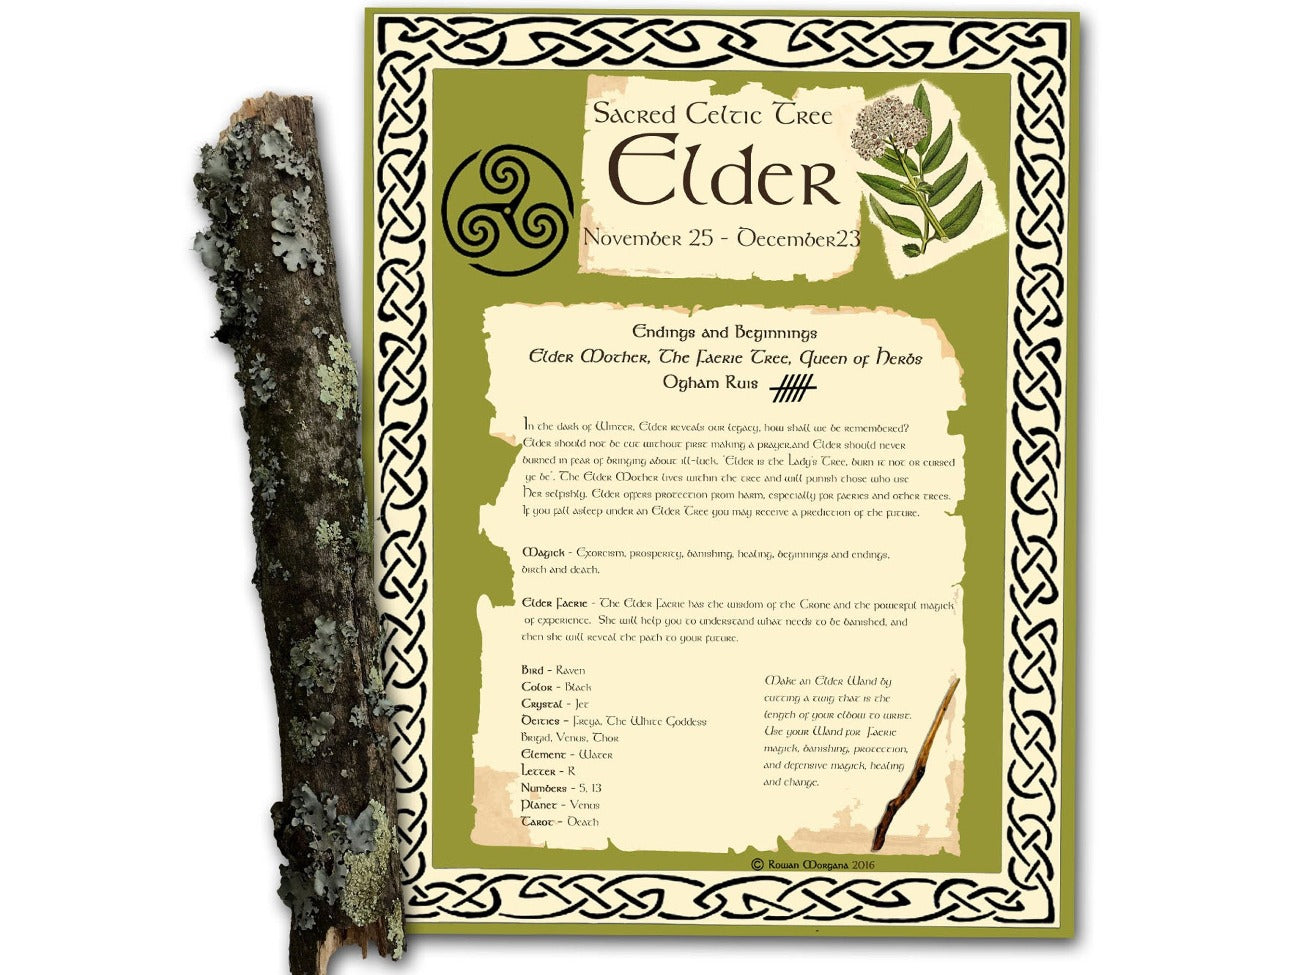 CELTIC TREES Bundle 15 Pages, Wicca Witchcraft Druid Tree Months, Celtic Tree Calendar, The Druids Calendar, Celtic Tree Month Ogham Lore- Morgana Magick Spell